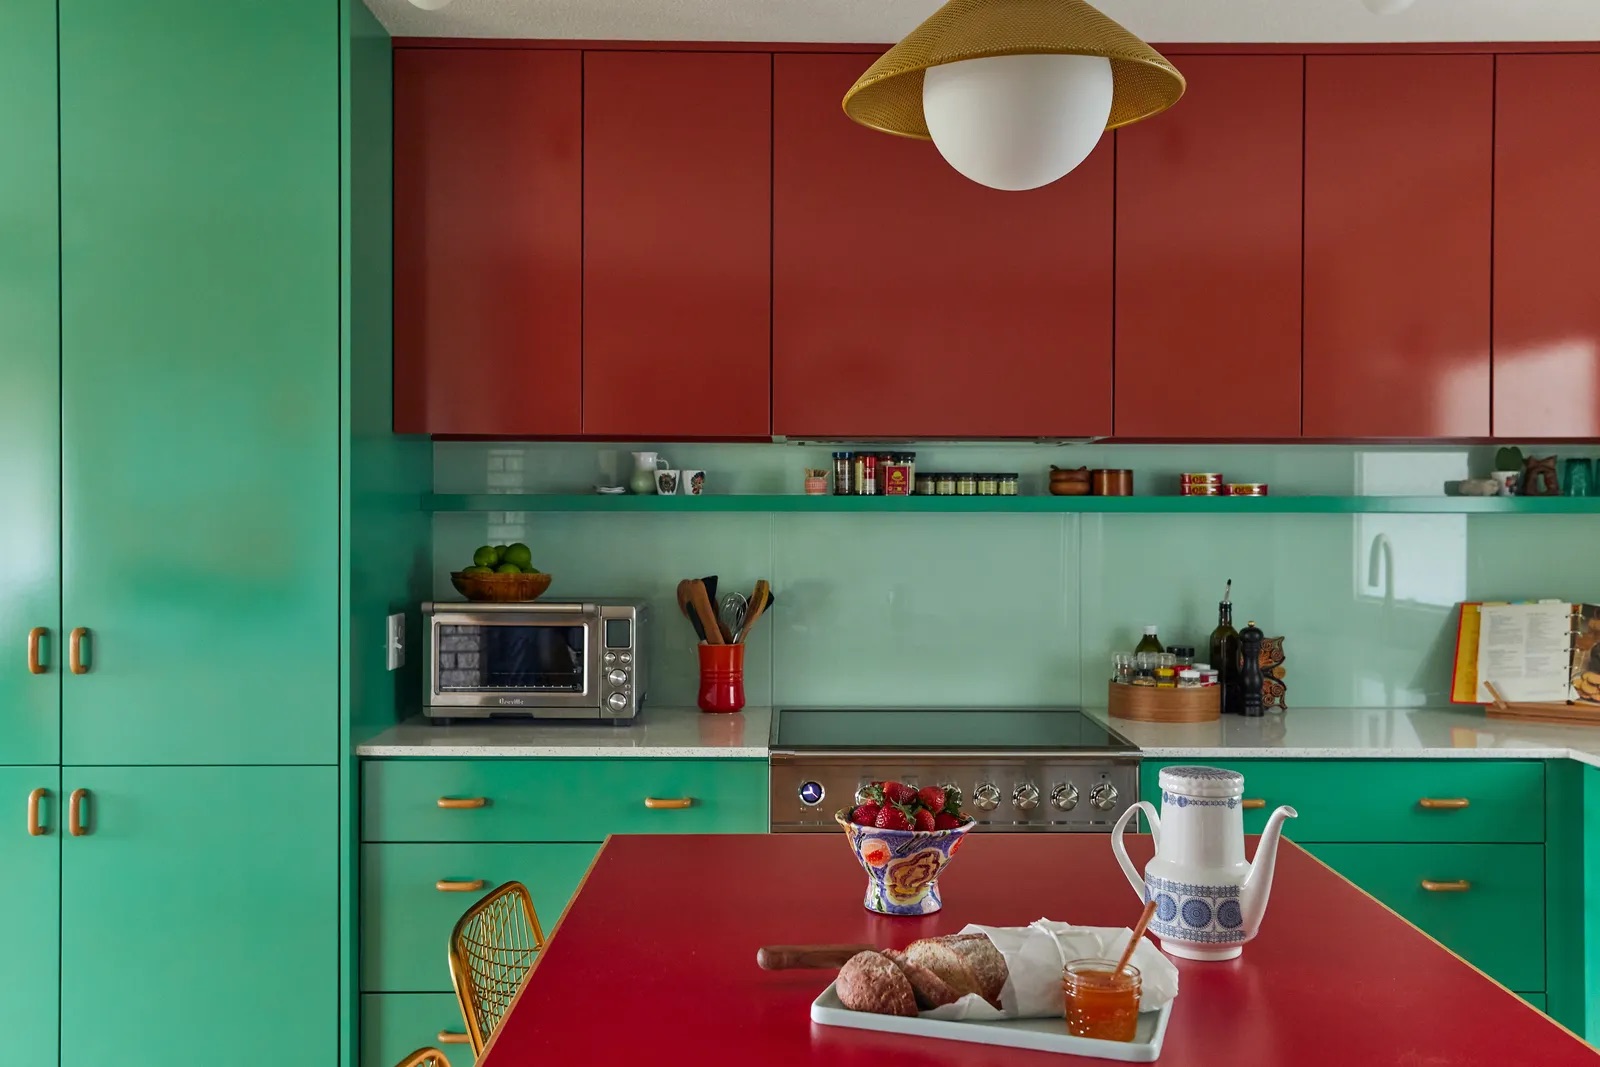 6 Bold Design Tips We Learnt From This Gucci-inspired Kitchen